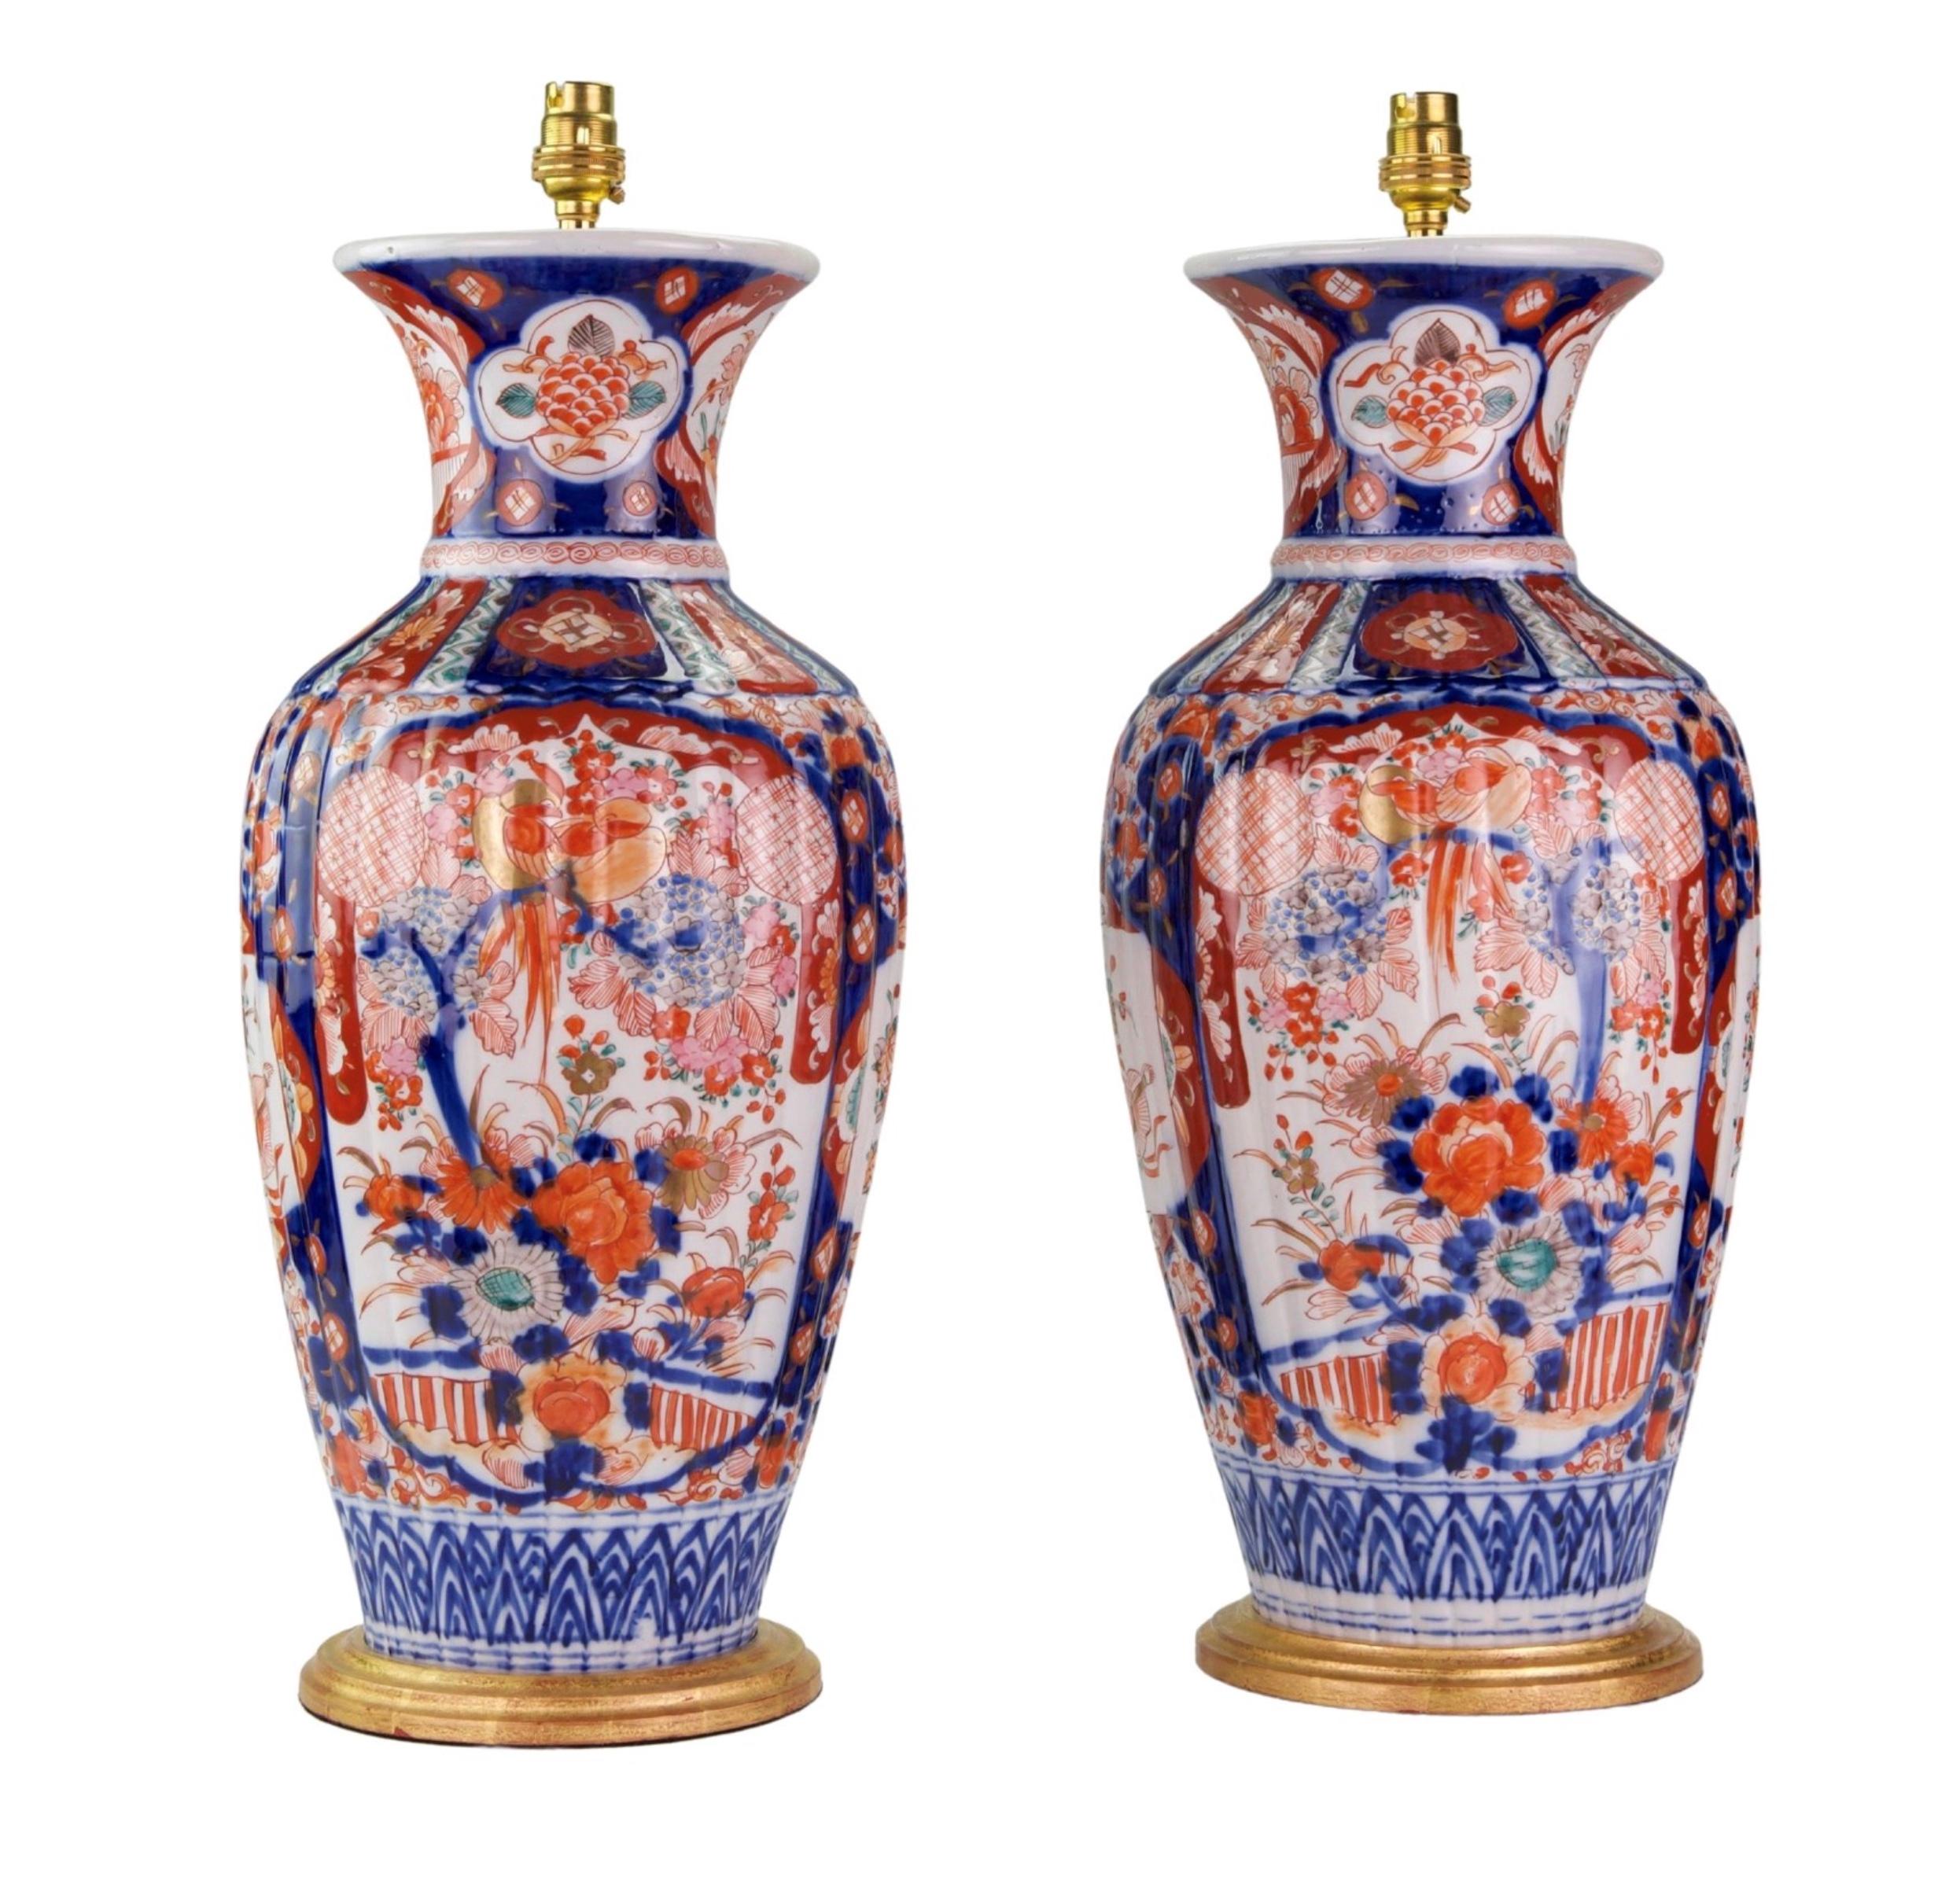 A fine pair of large Japanese Imari porcelain baluster vases, the ribbed bodies decorated in the typical Imari palette of blues, iron red and reds on a white background with central panels with a flowering tree in a garden landscape, surrounded by